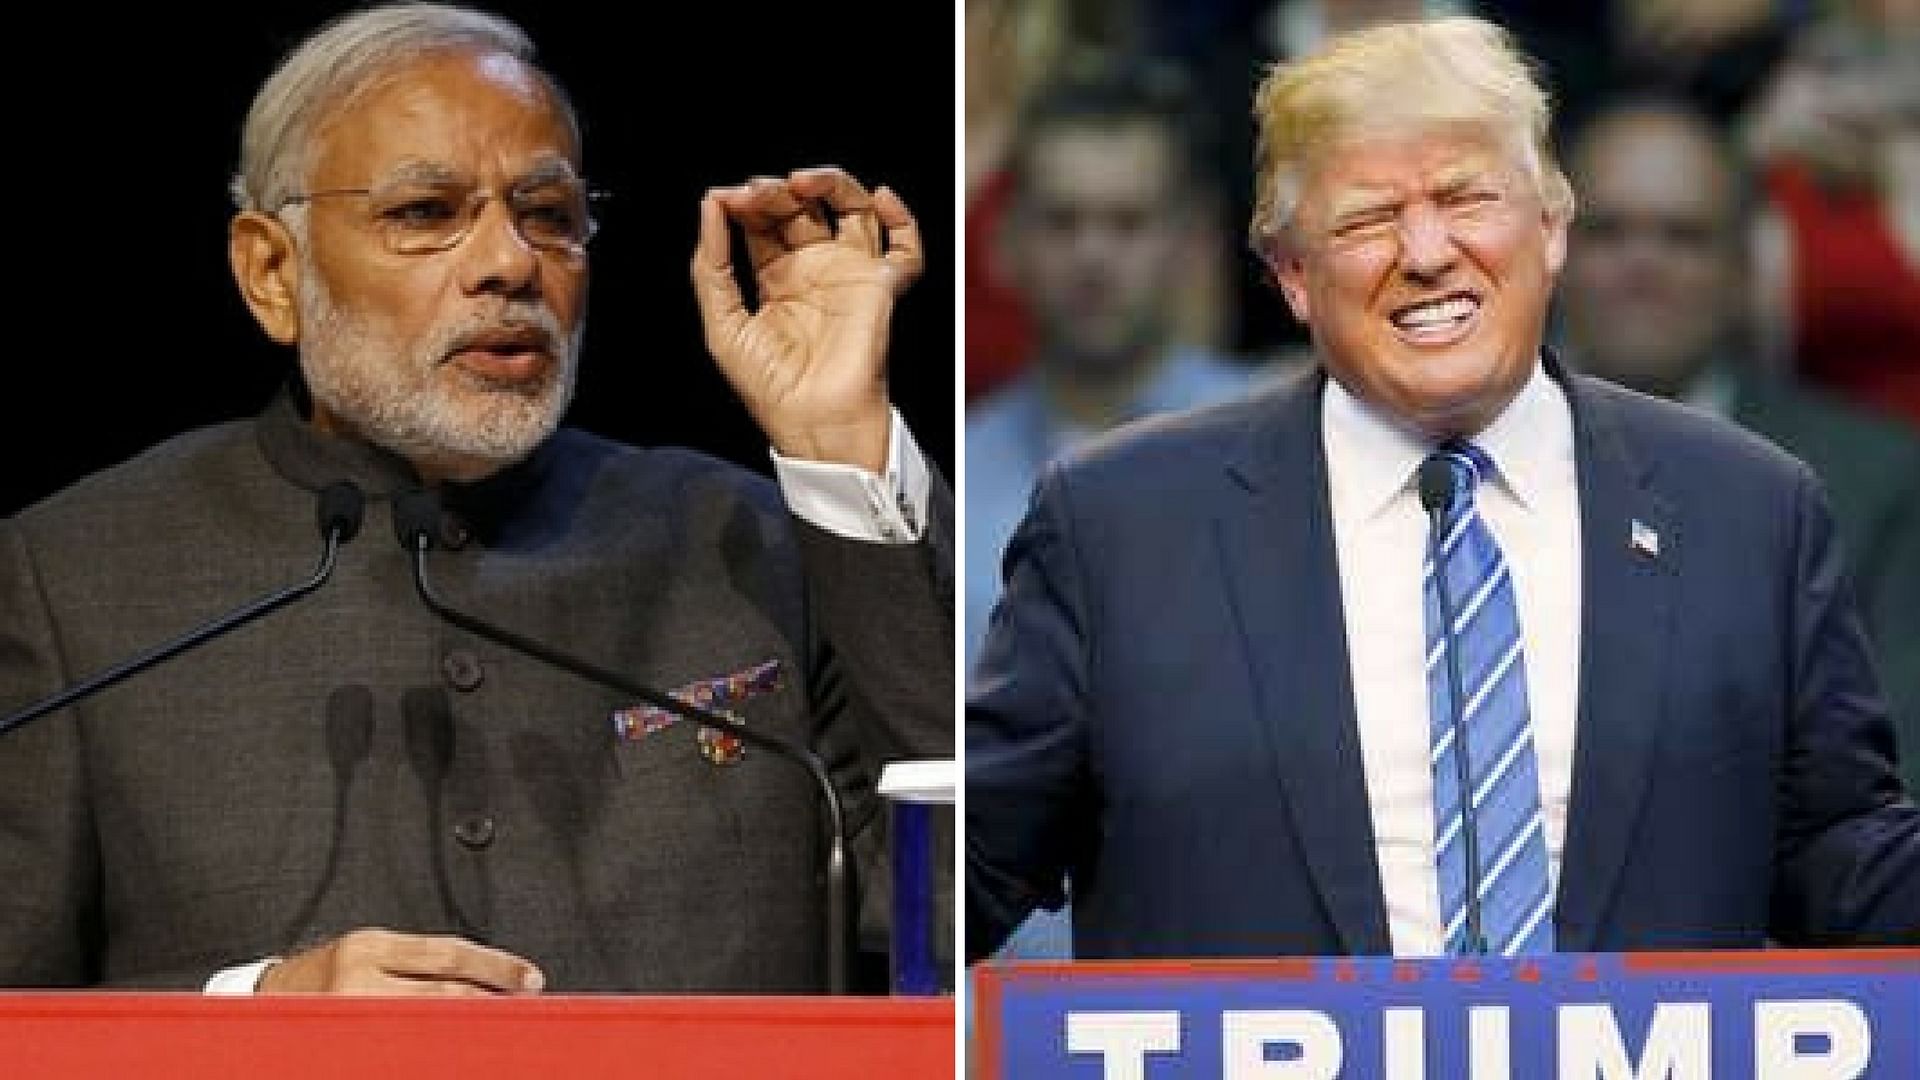 Prime Minister Narendra Modi and US President Donald Trump. (Photo: Reuters/Altered by<b> The Quint</b>)